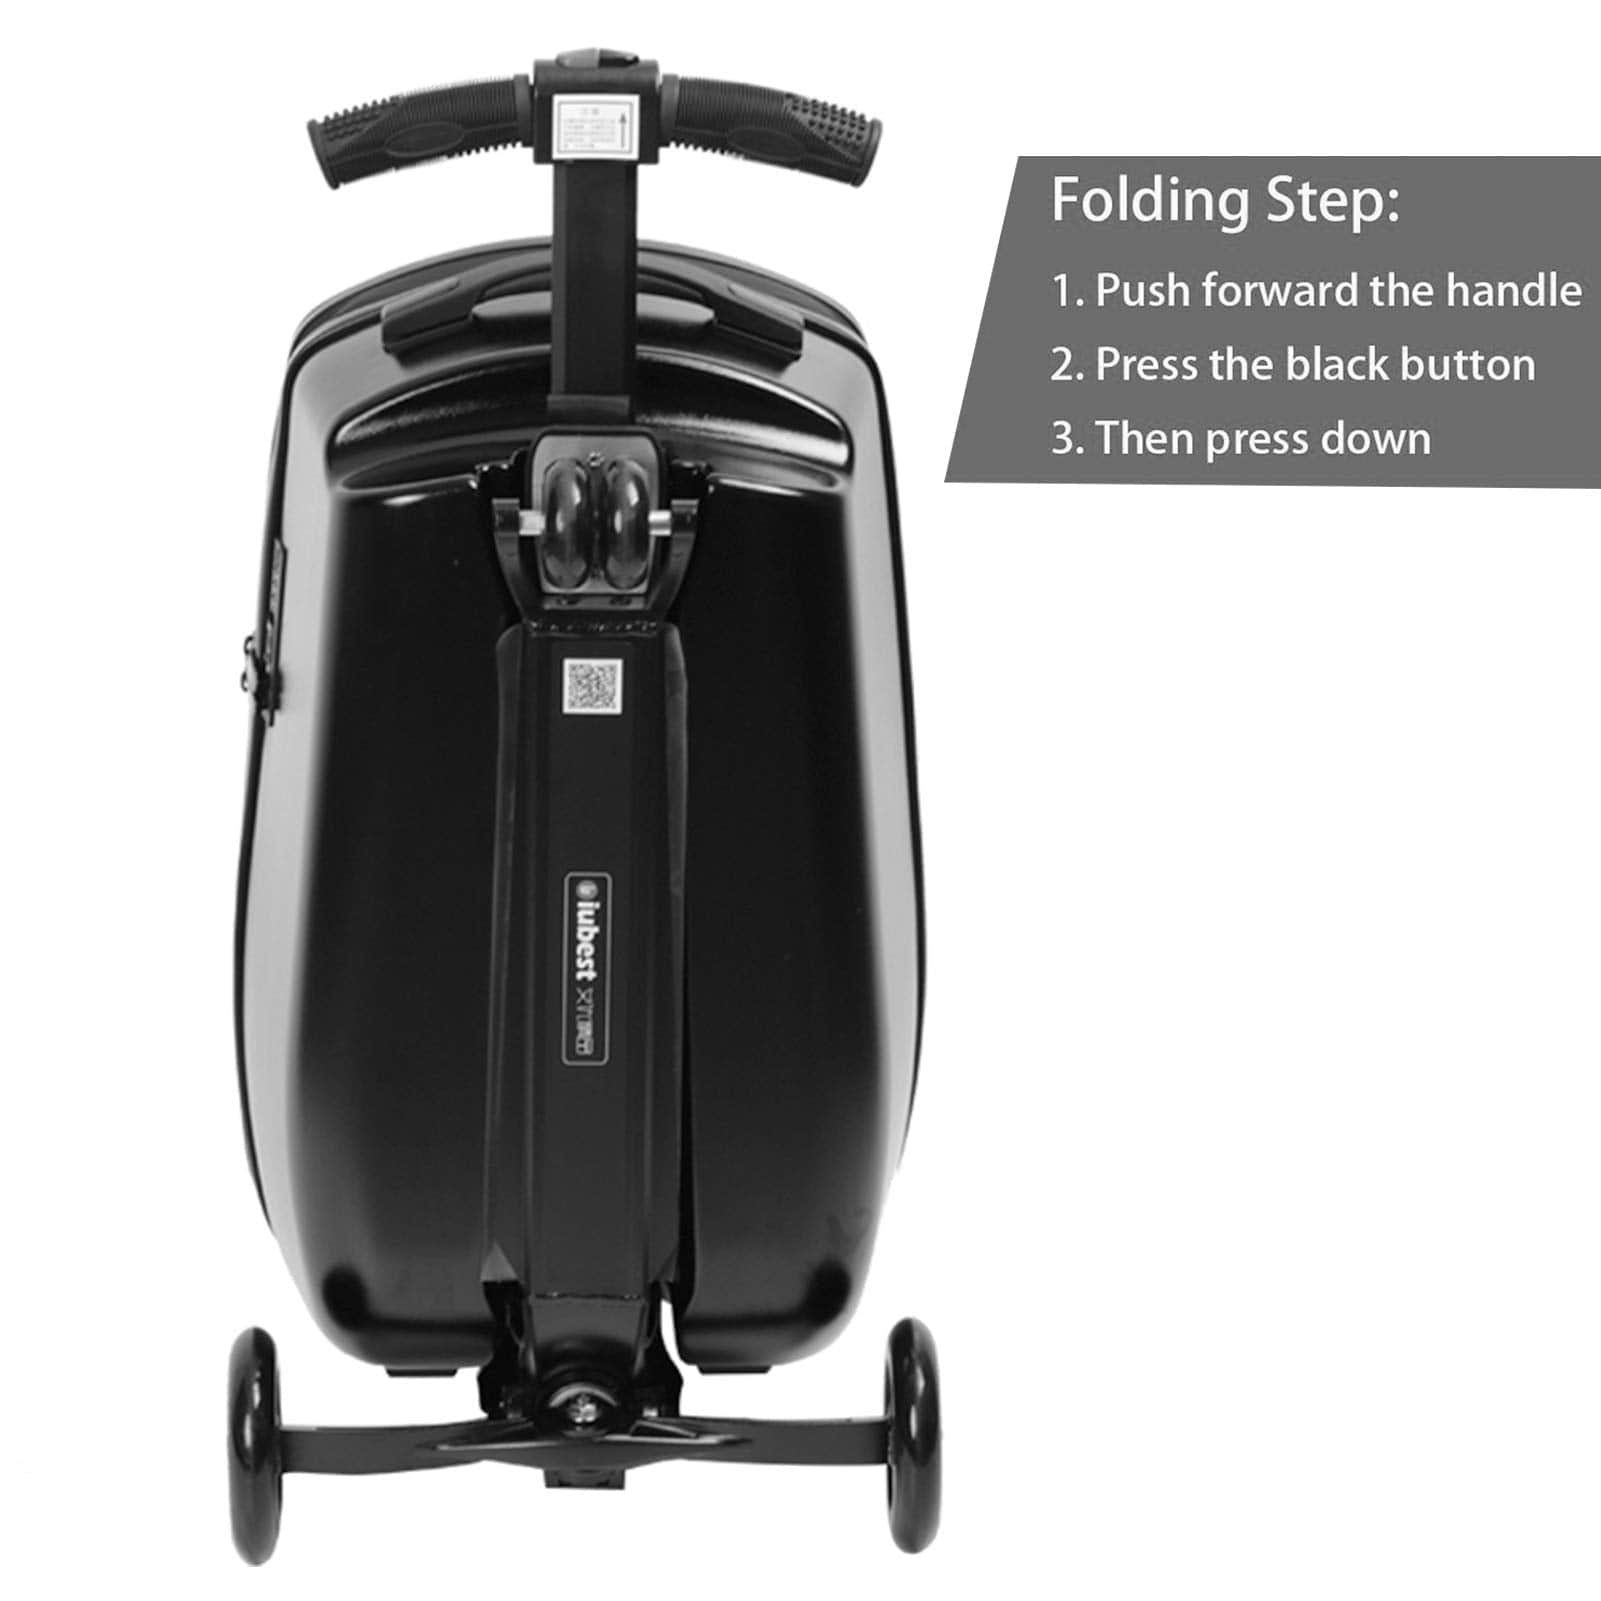 HomeBound Essentials Scooter Suitcase - Rolling Luggage With Skateboard